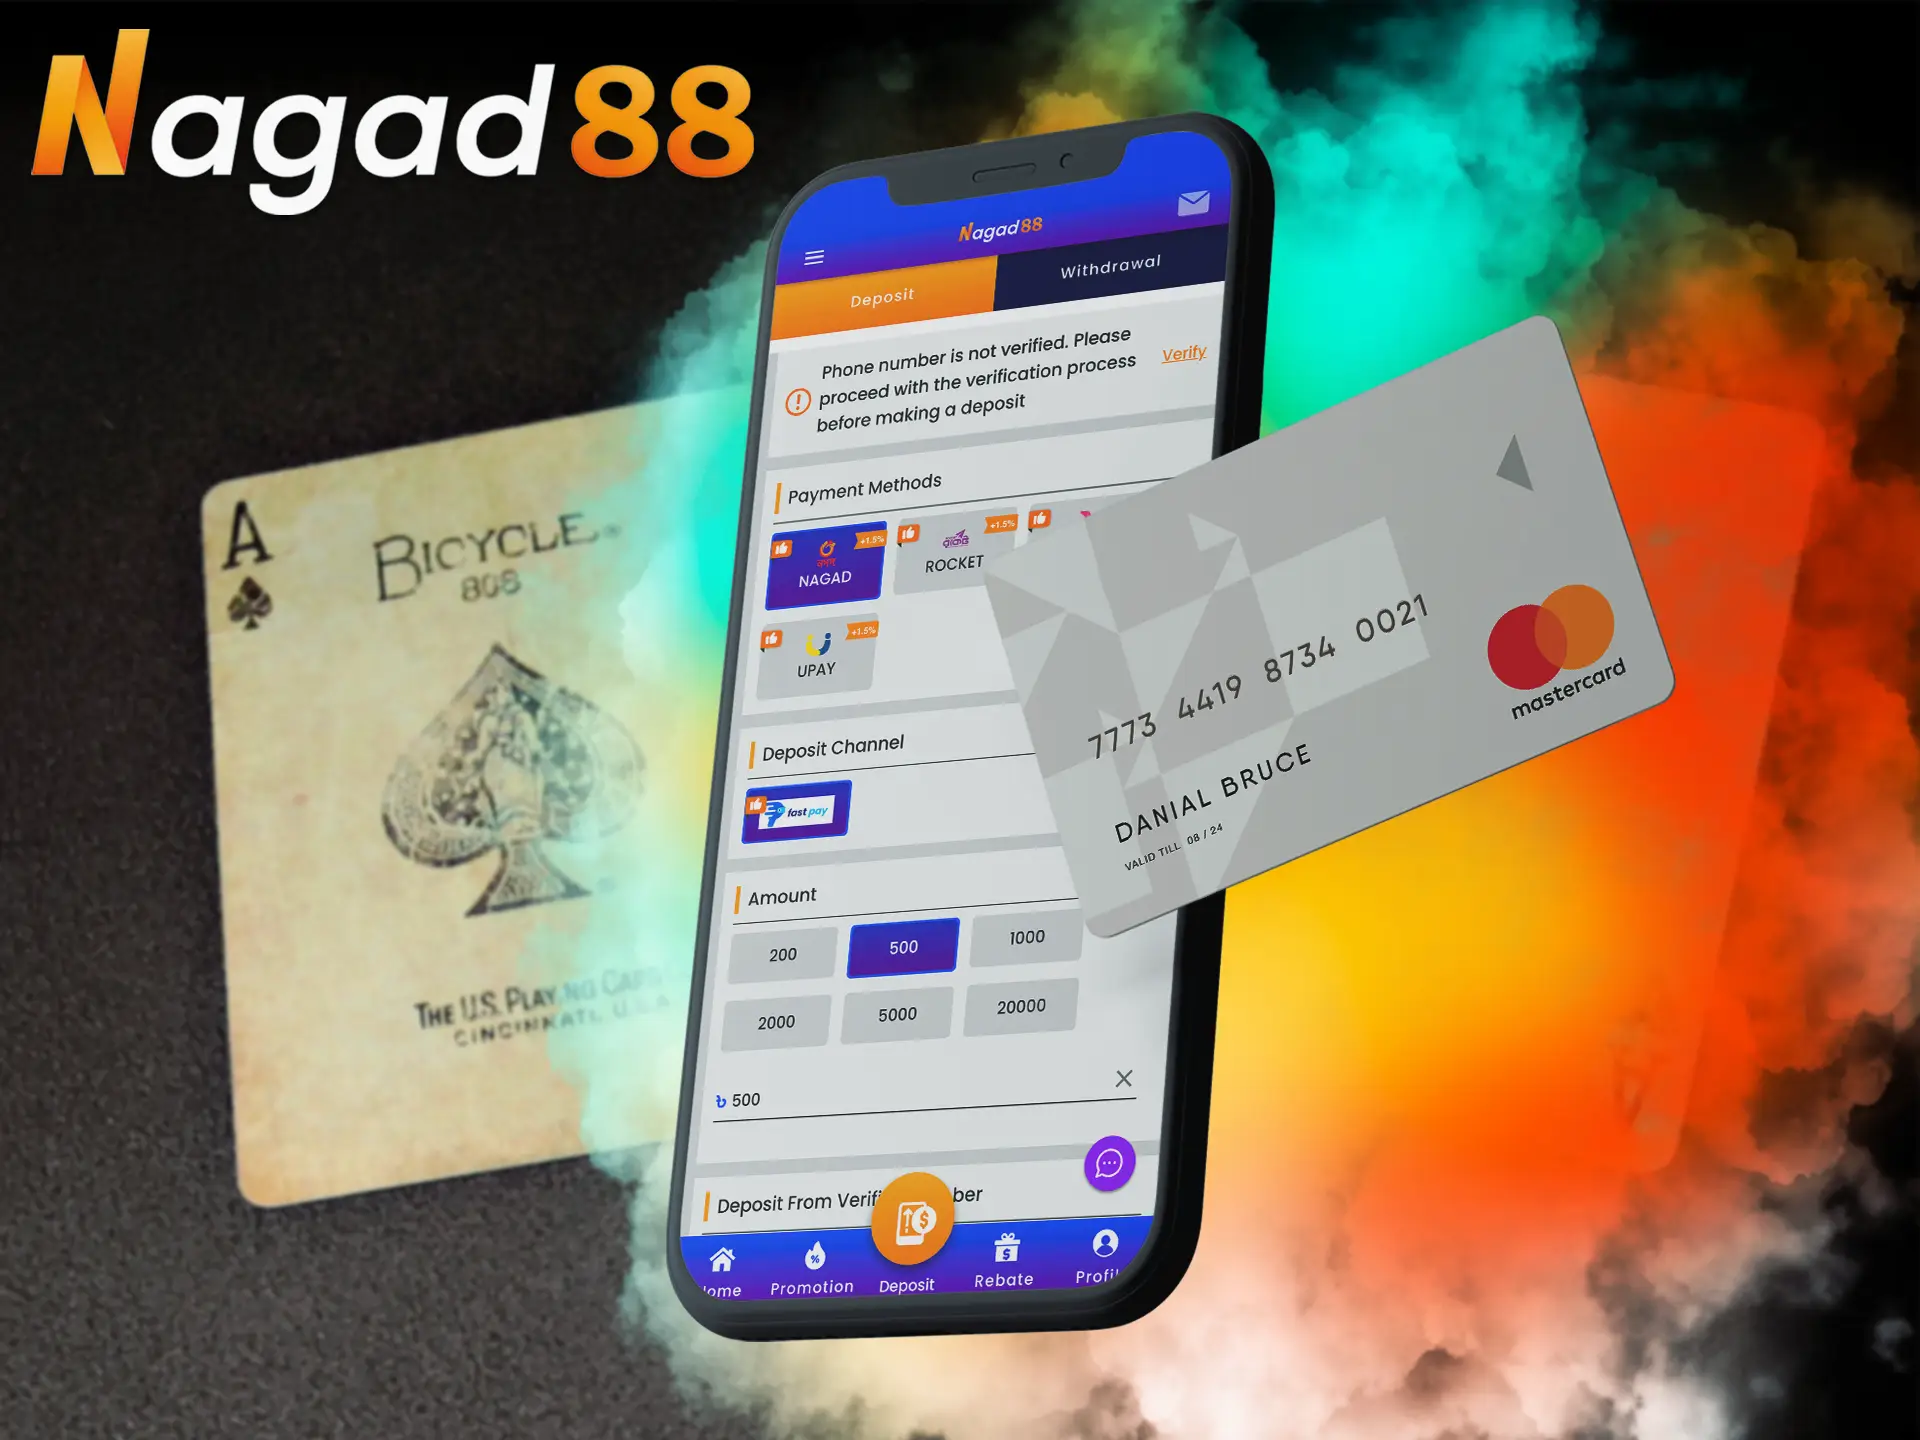 The presence of popular payment methods in Bangladesh ensures that you get your winnings in Nagad88 very quickly and safely.